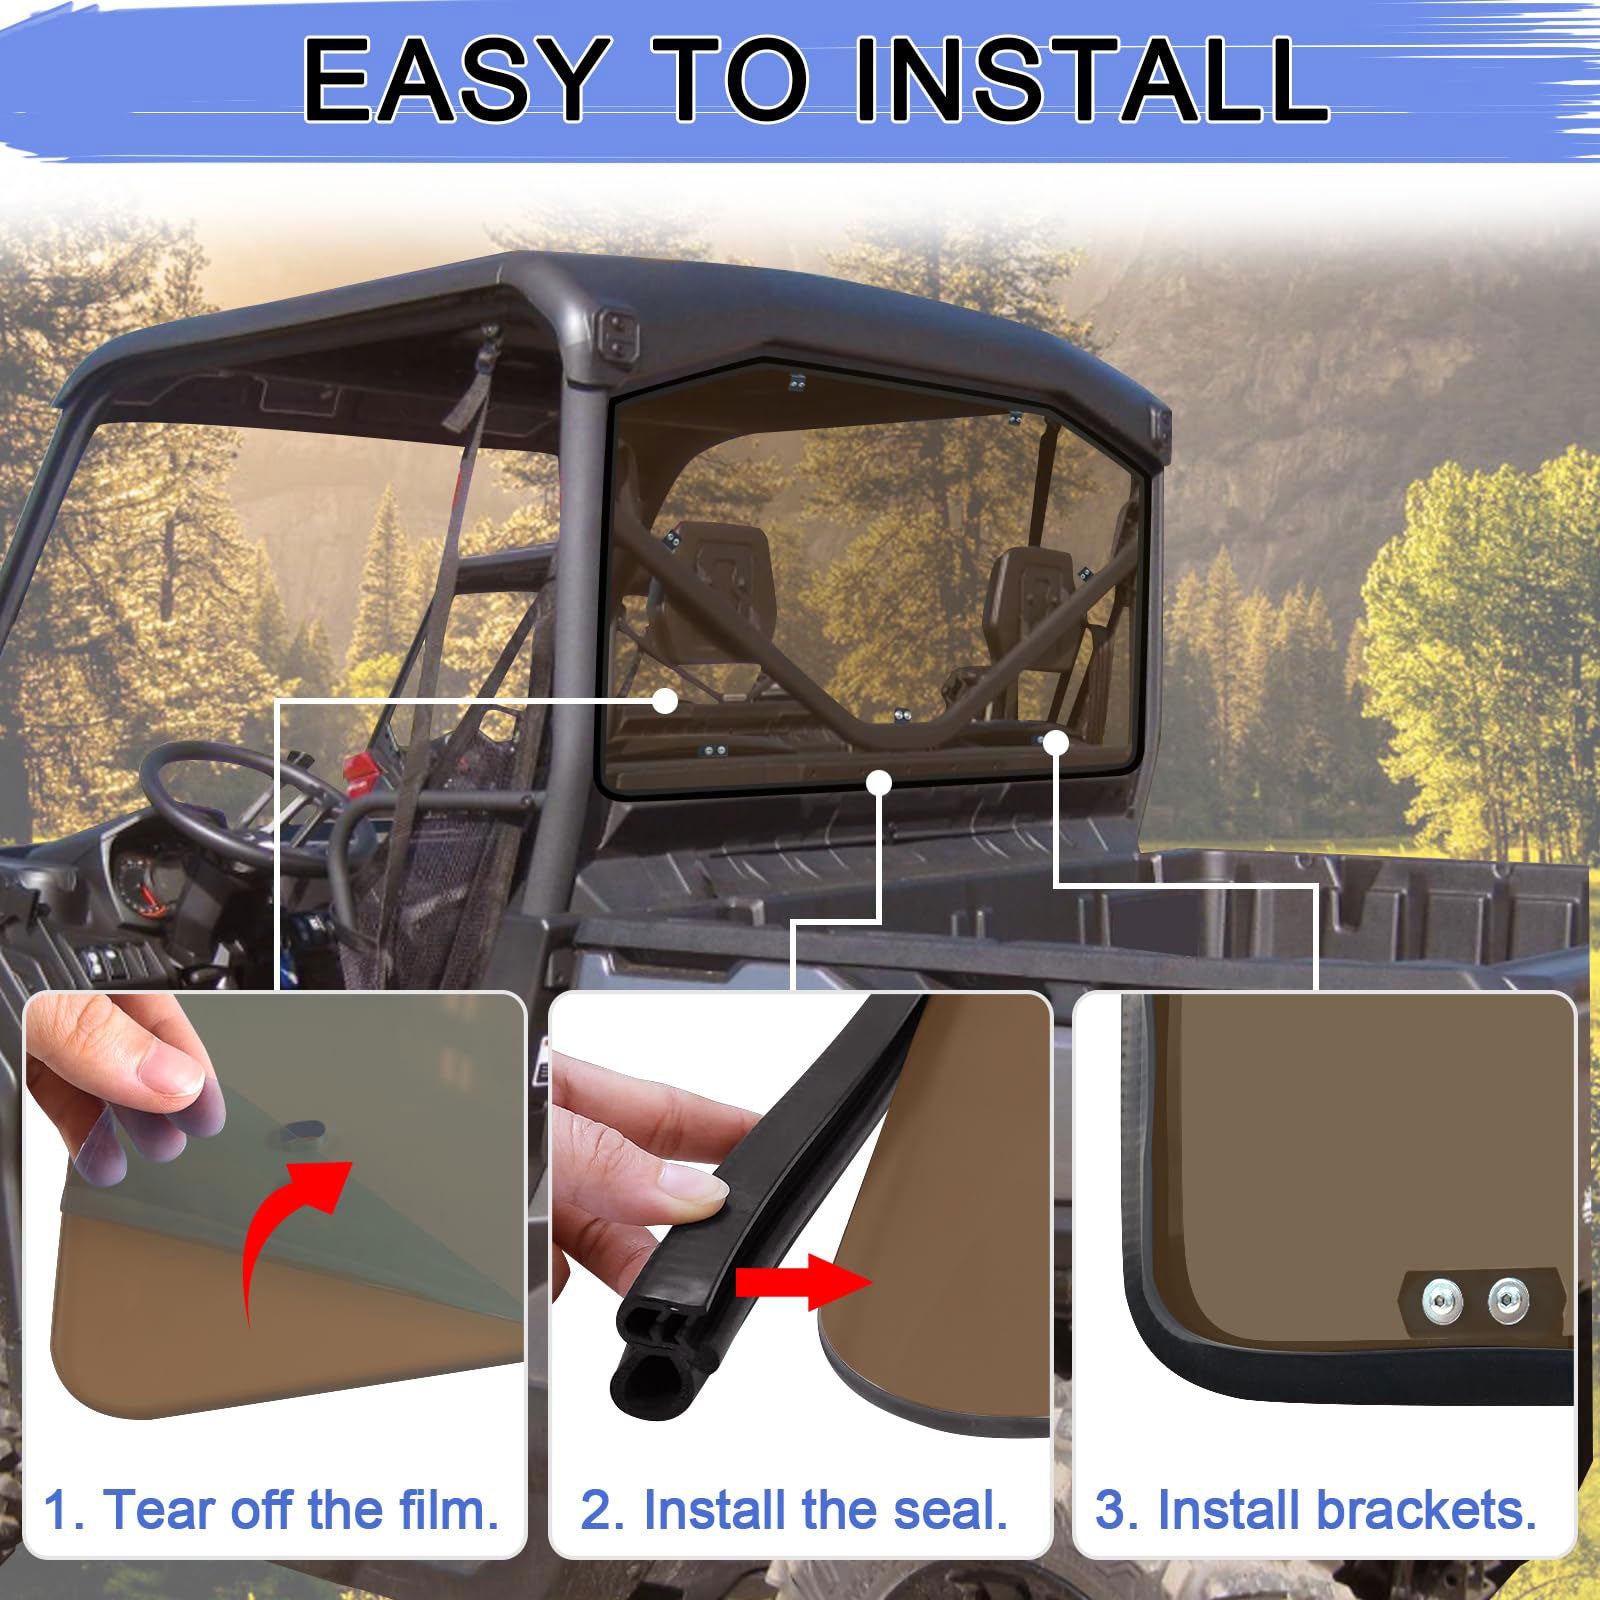 easy to install the rear tint defender window